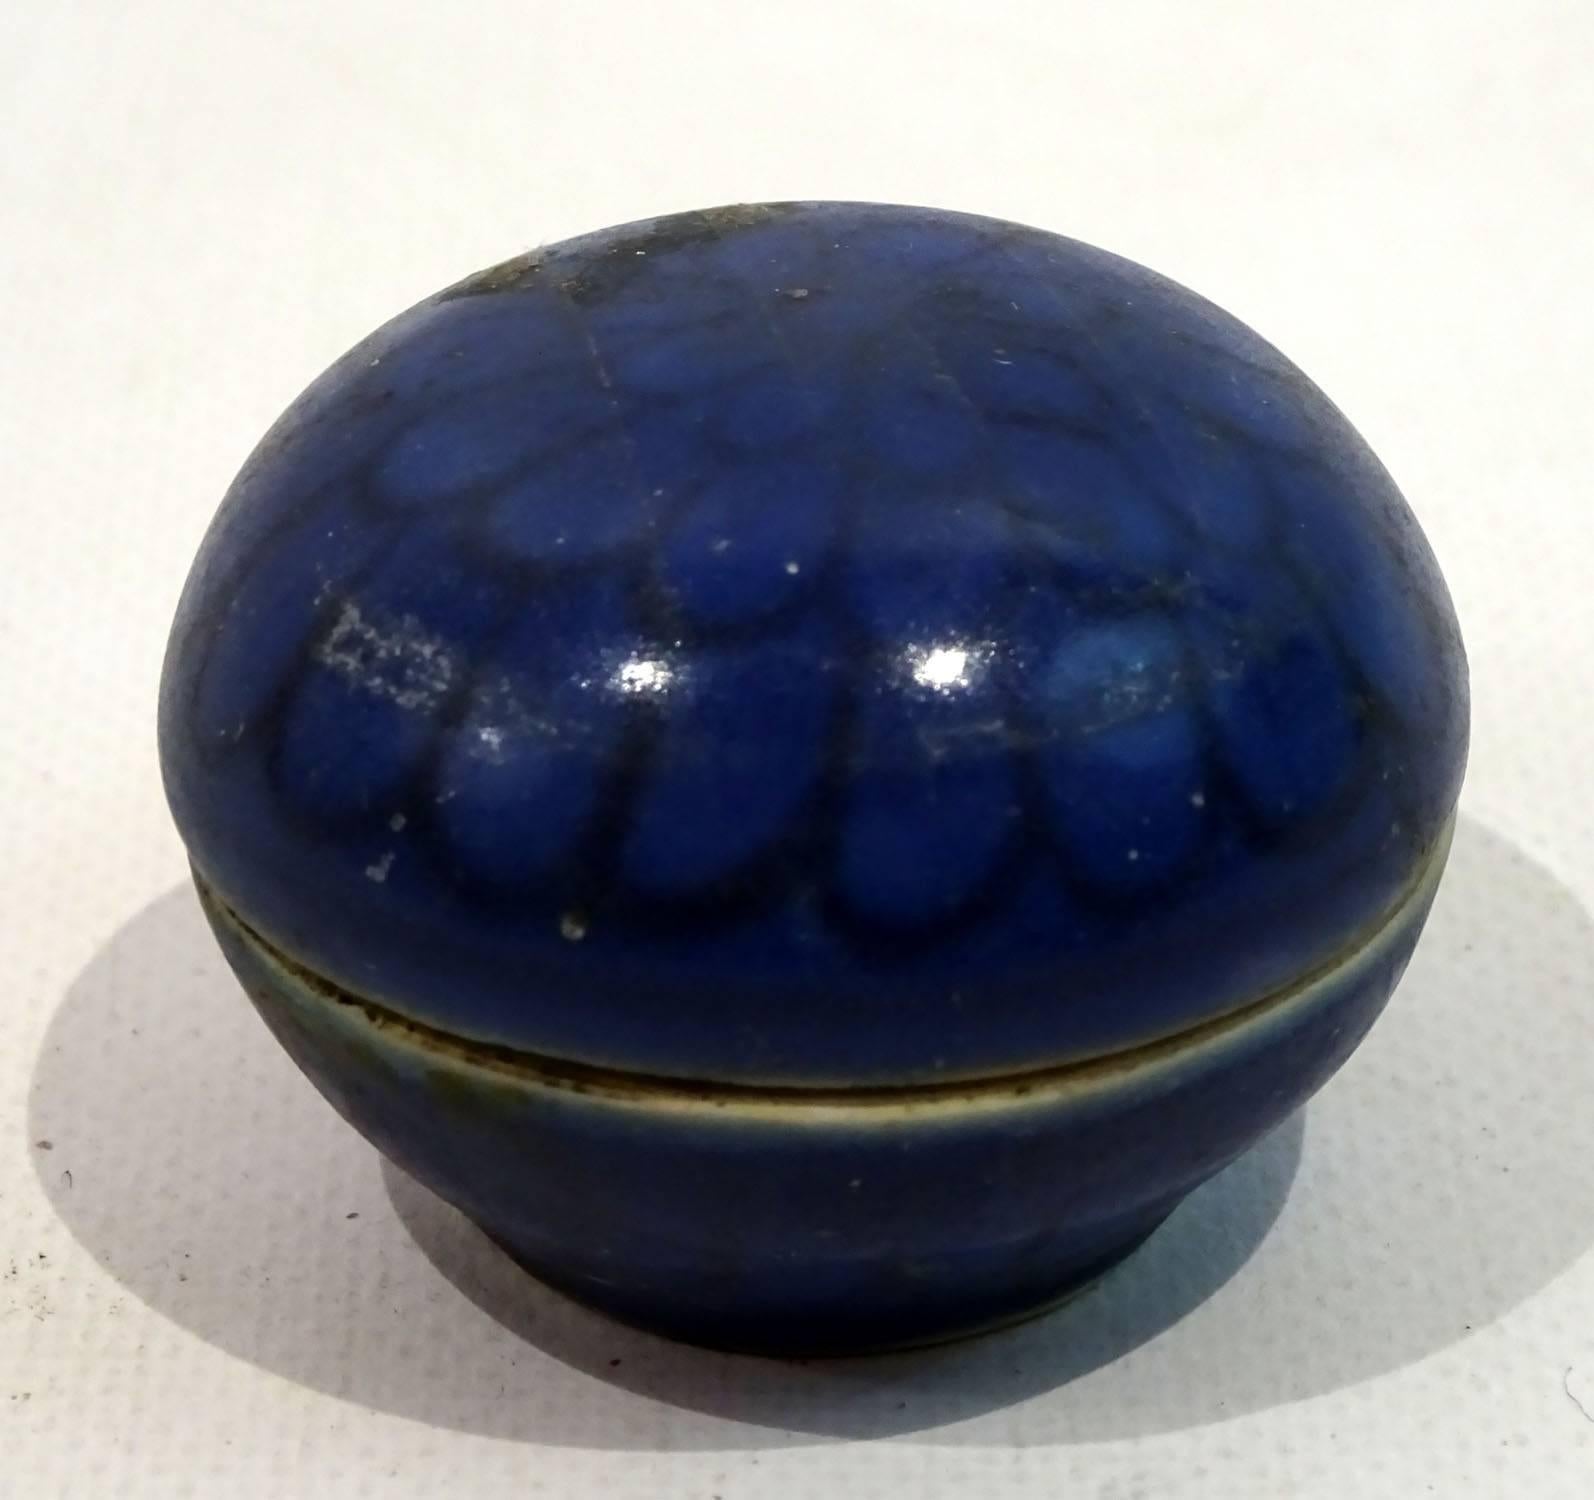 17th Century Chinese Porcelain Cosmetic Jar with Lid from The Hatcher Collection 2